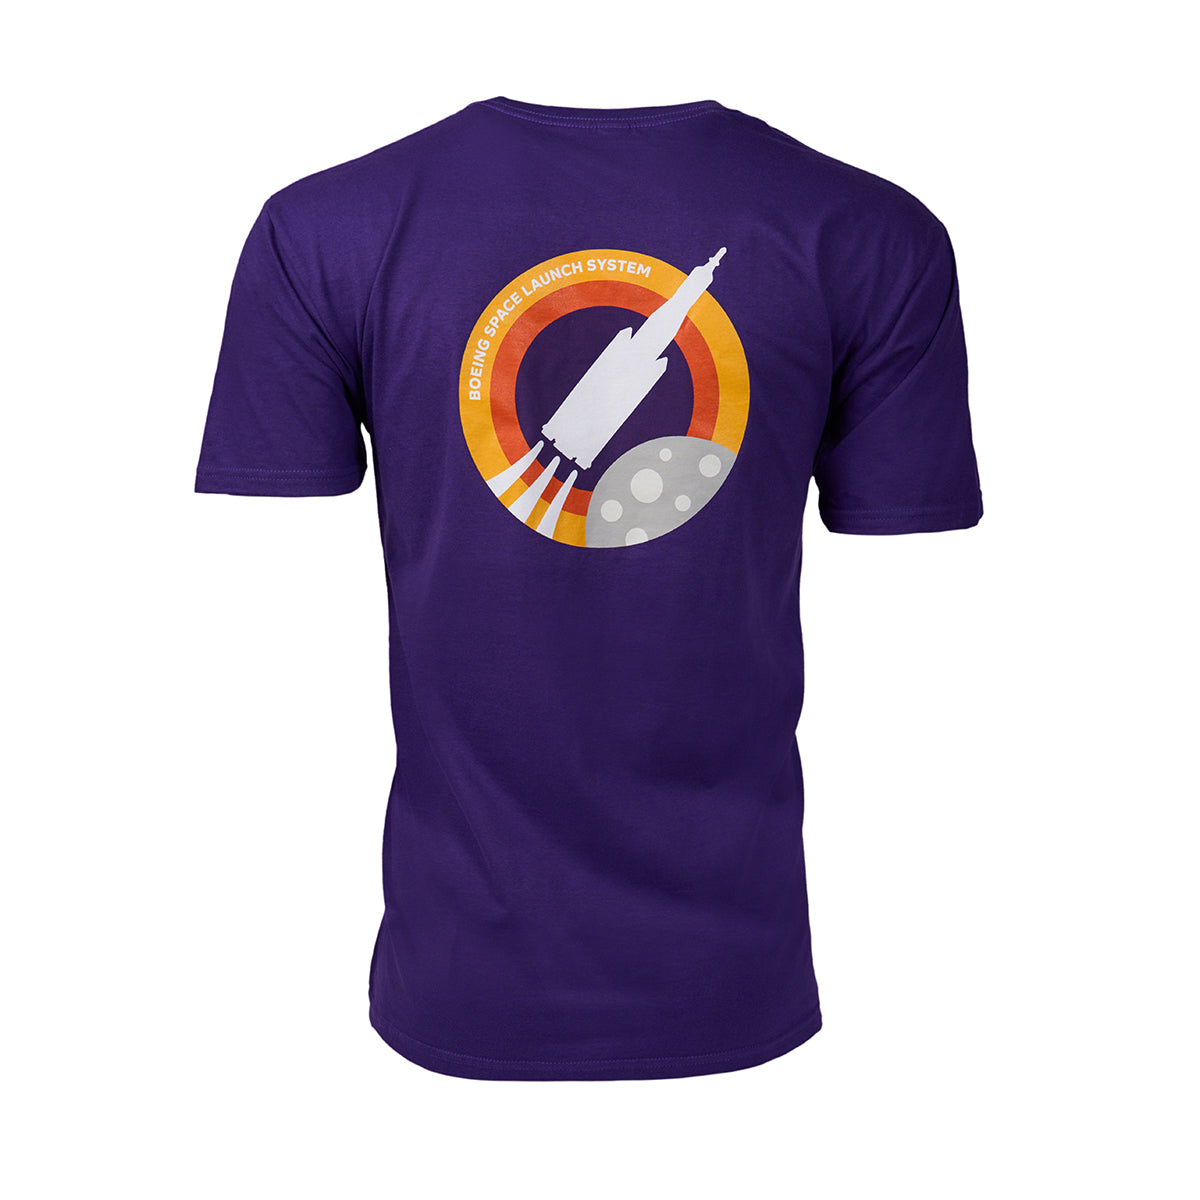 Full product image of the back side of the t-shirt in a purple color.  Showing the Skyward graphic of the Boeing Space Launch System.